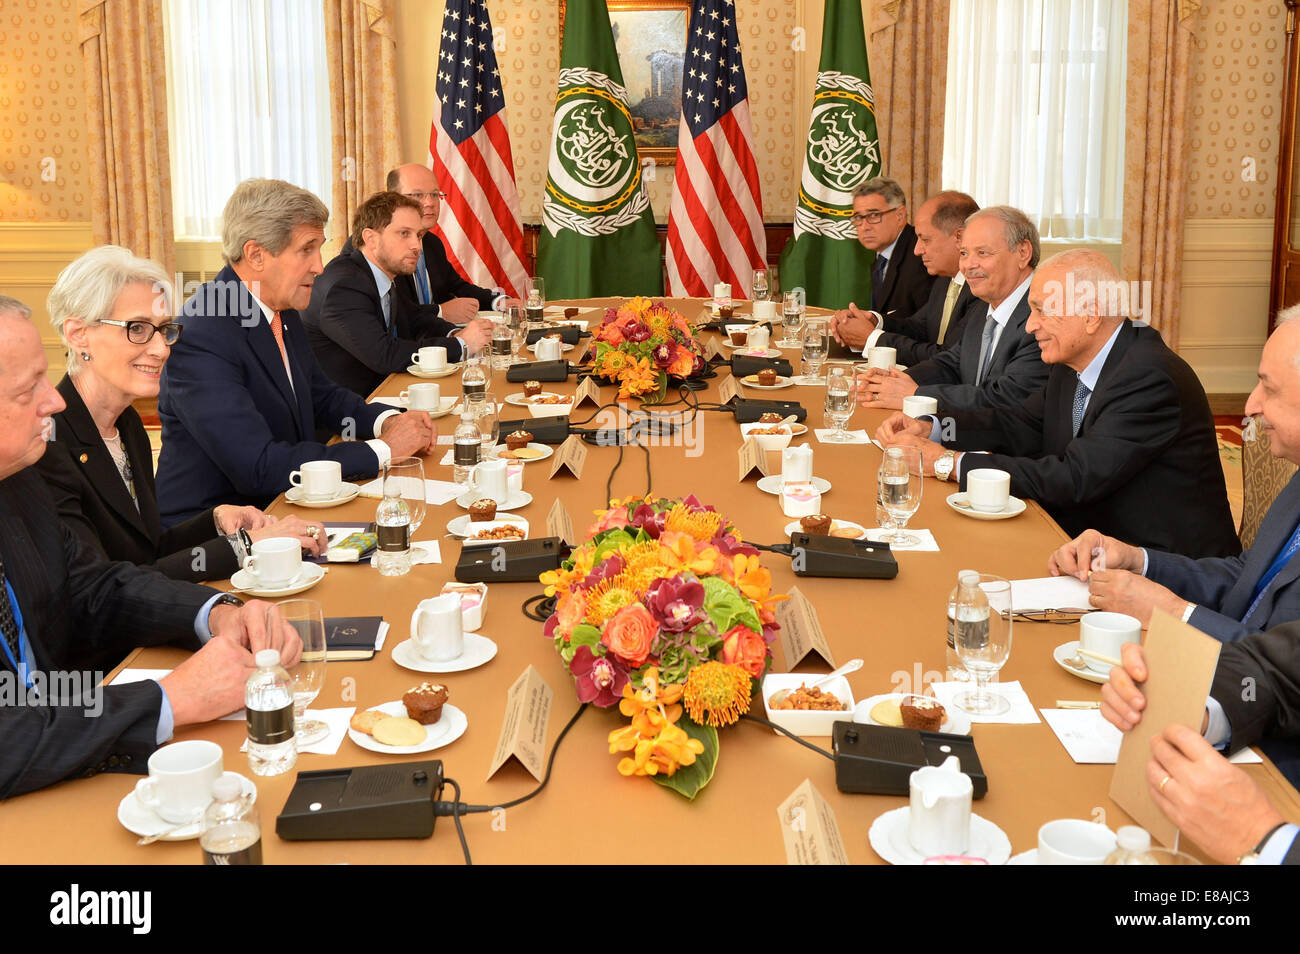 U.S. Secretary of State John Kerry meets with Arab League Secretary General Nabil al-Araby in New York City on September 23, 2014. The Secretary is holding meetings in conjunction with the 69th Session of the United Nations General Assembly. Stock Photo